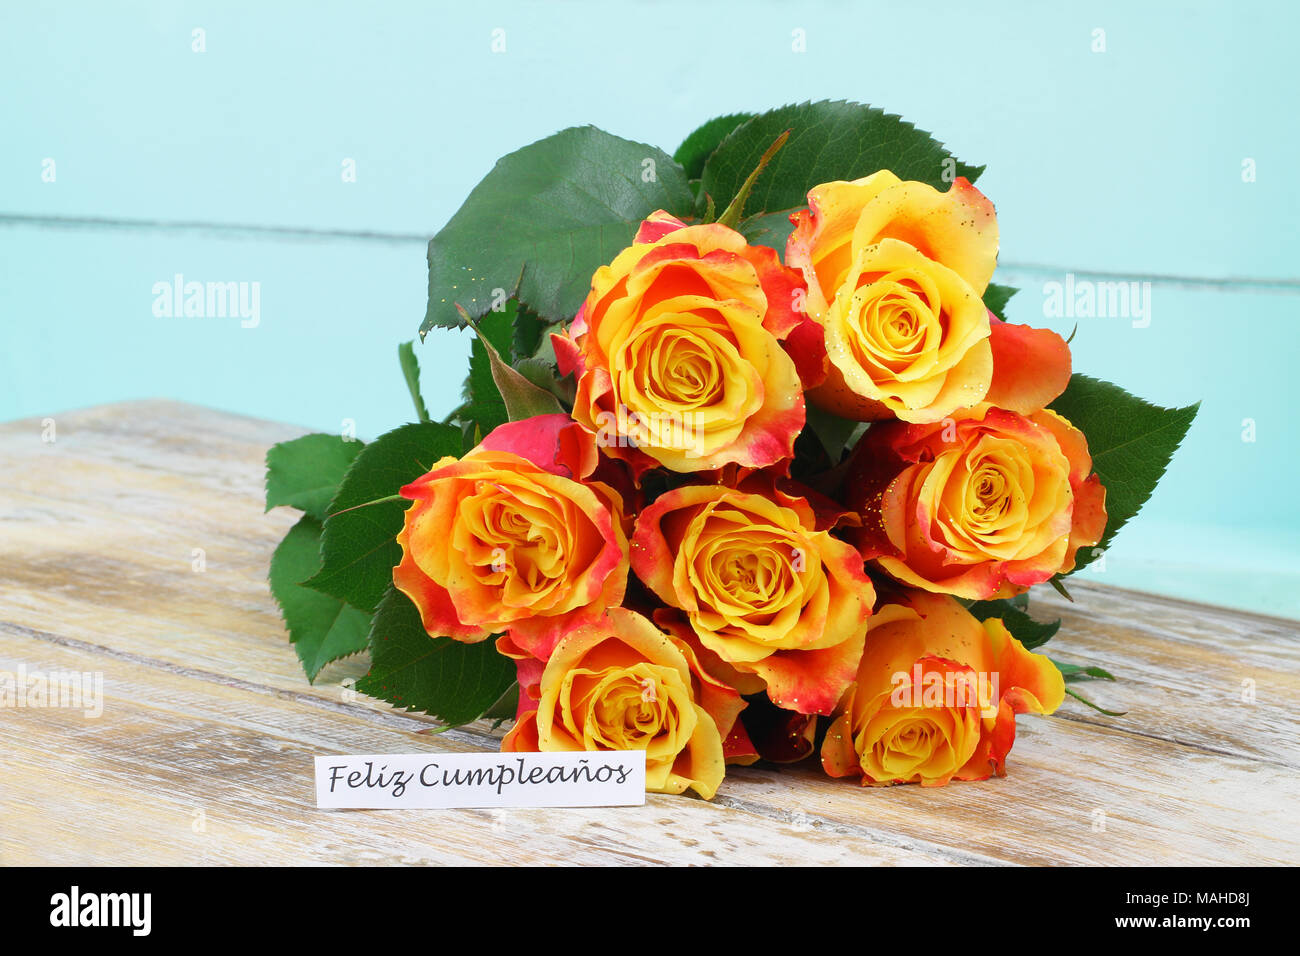 Feliz Cumpleanos (Happy Birthday in Spanish) card with colorful roses bouquet with glitter Stock Photo